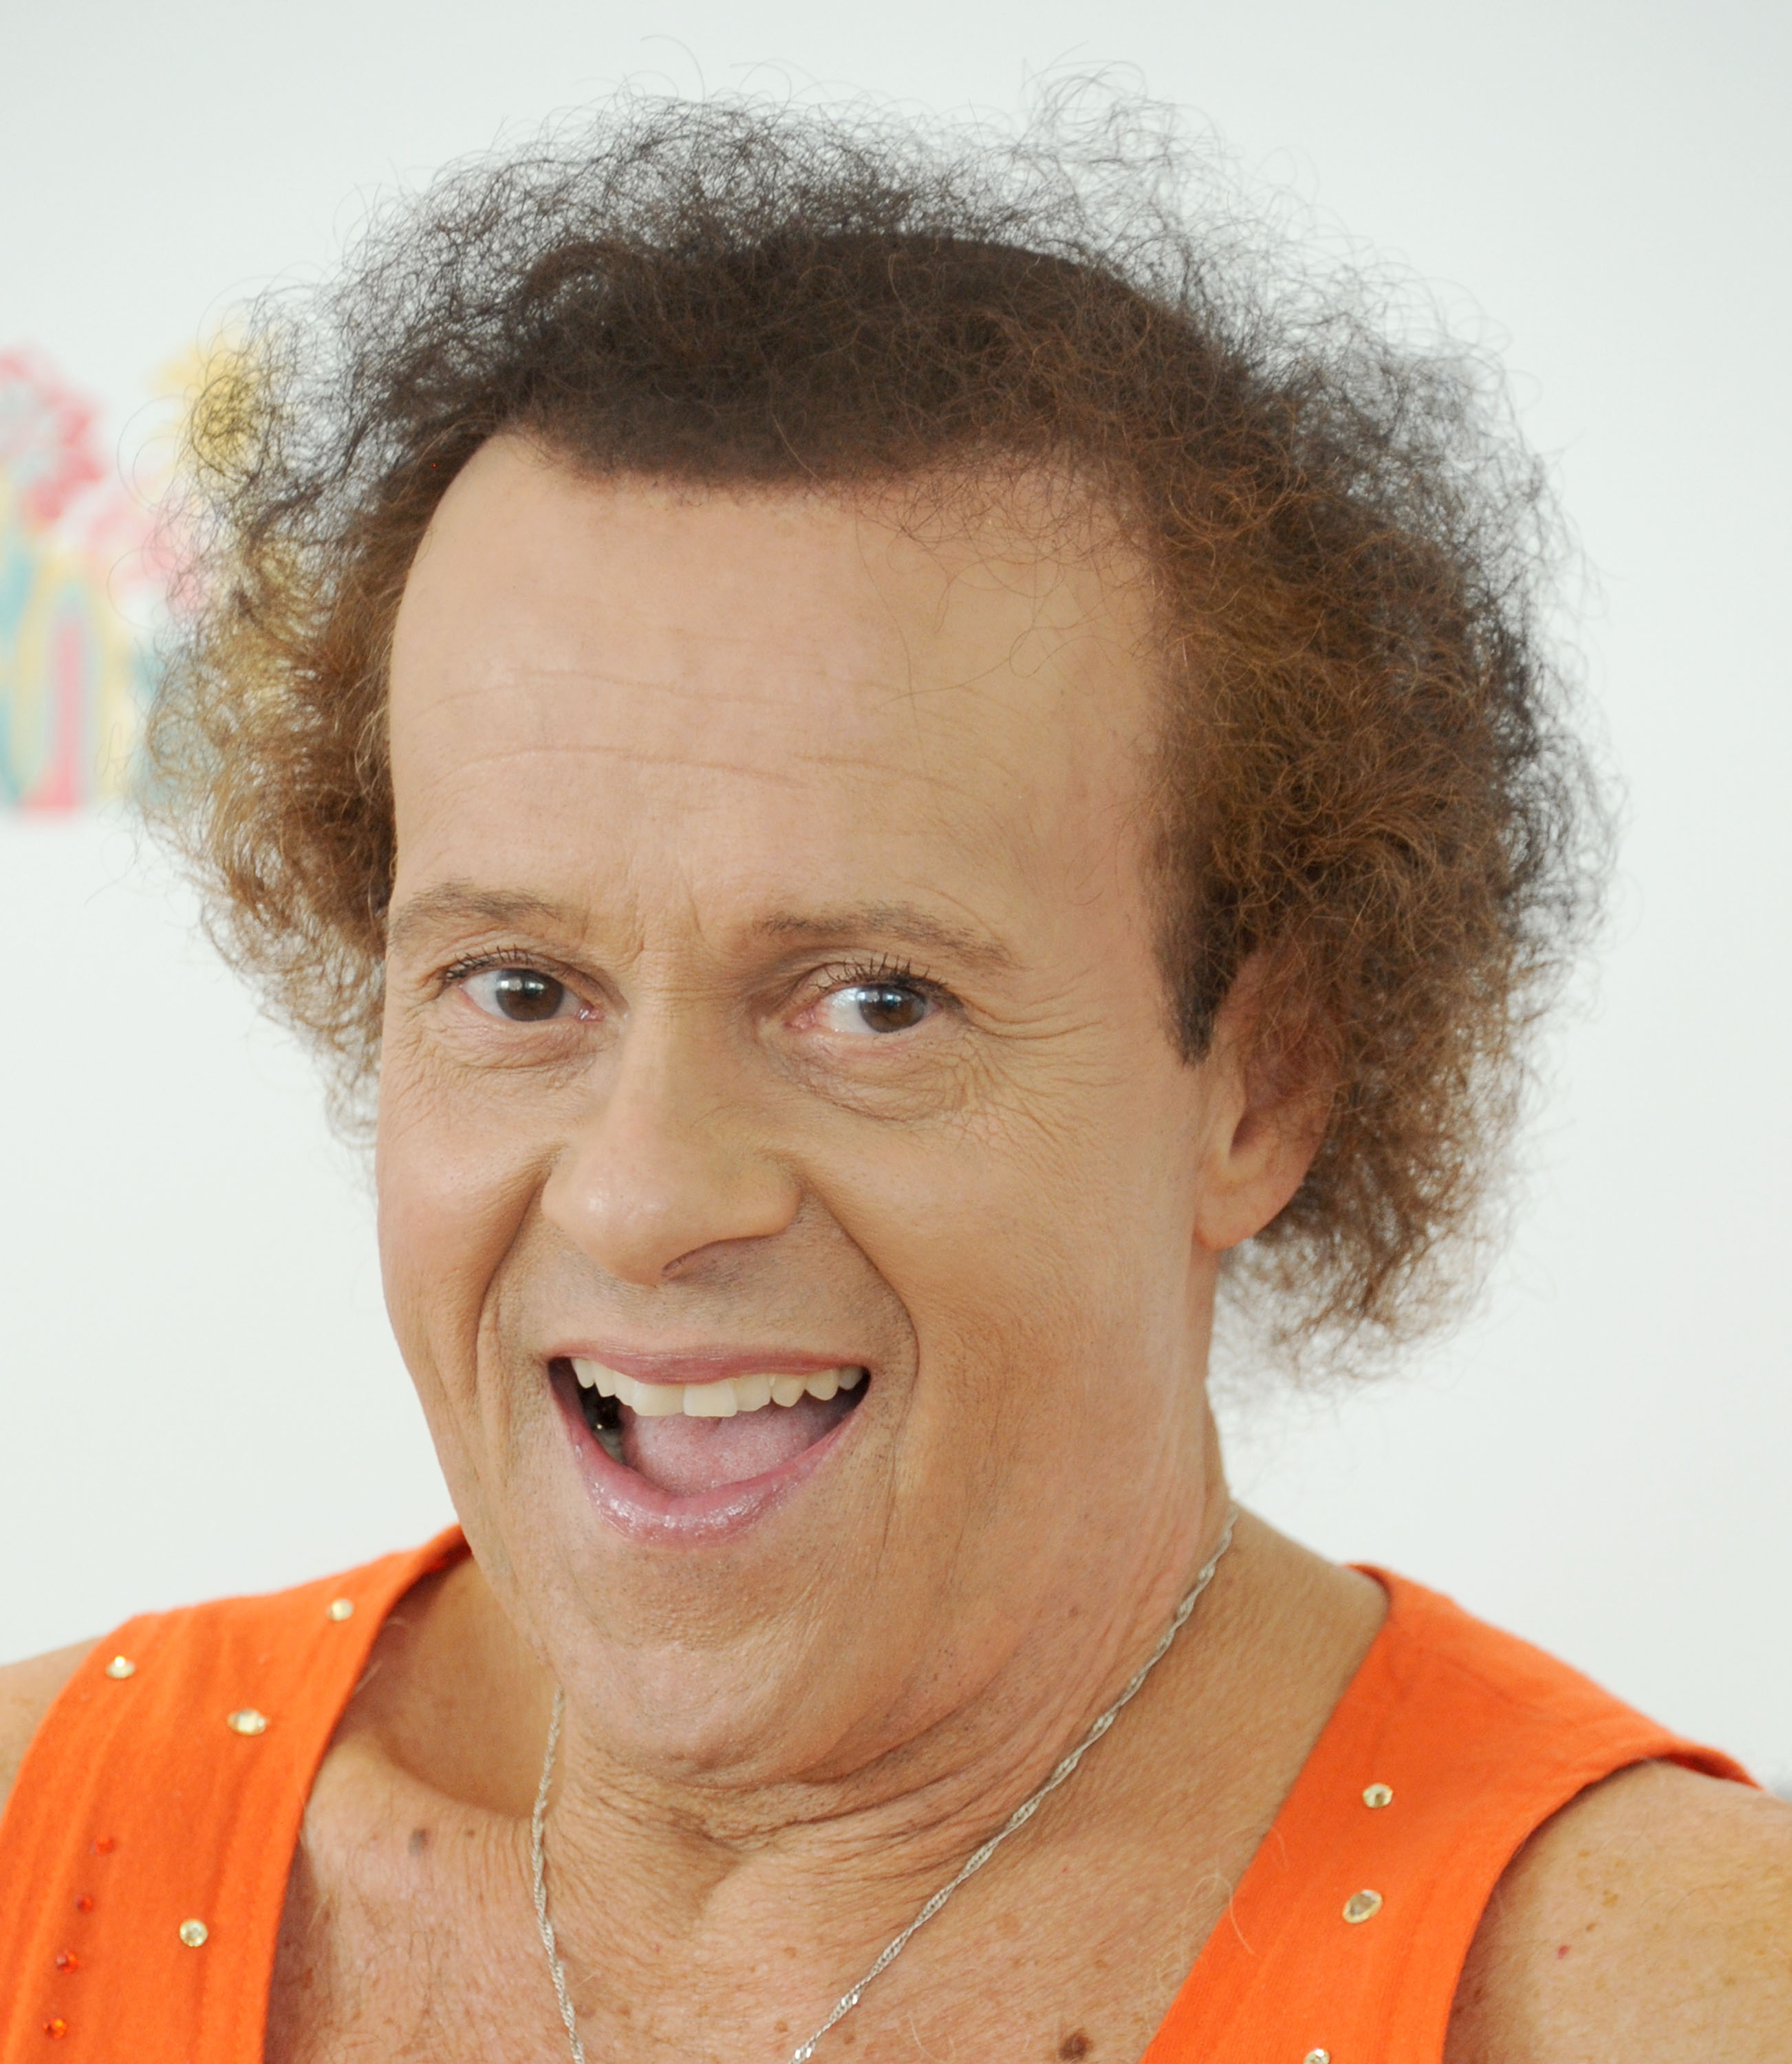 Actor/fitness personality Richard Simmons at Century Park on June 2, 2013, in Los Angeles, California | Source: Getty Images